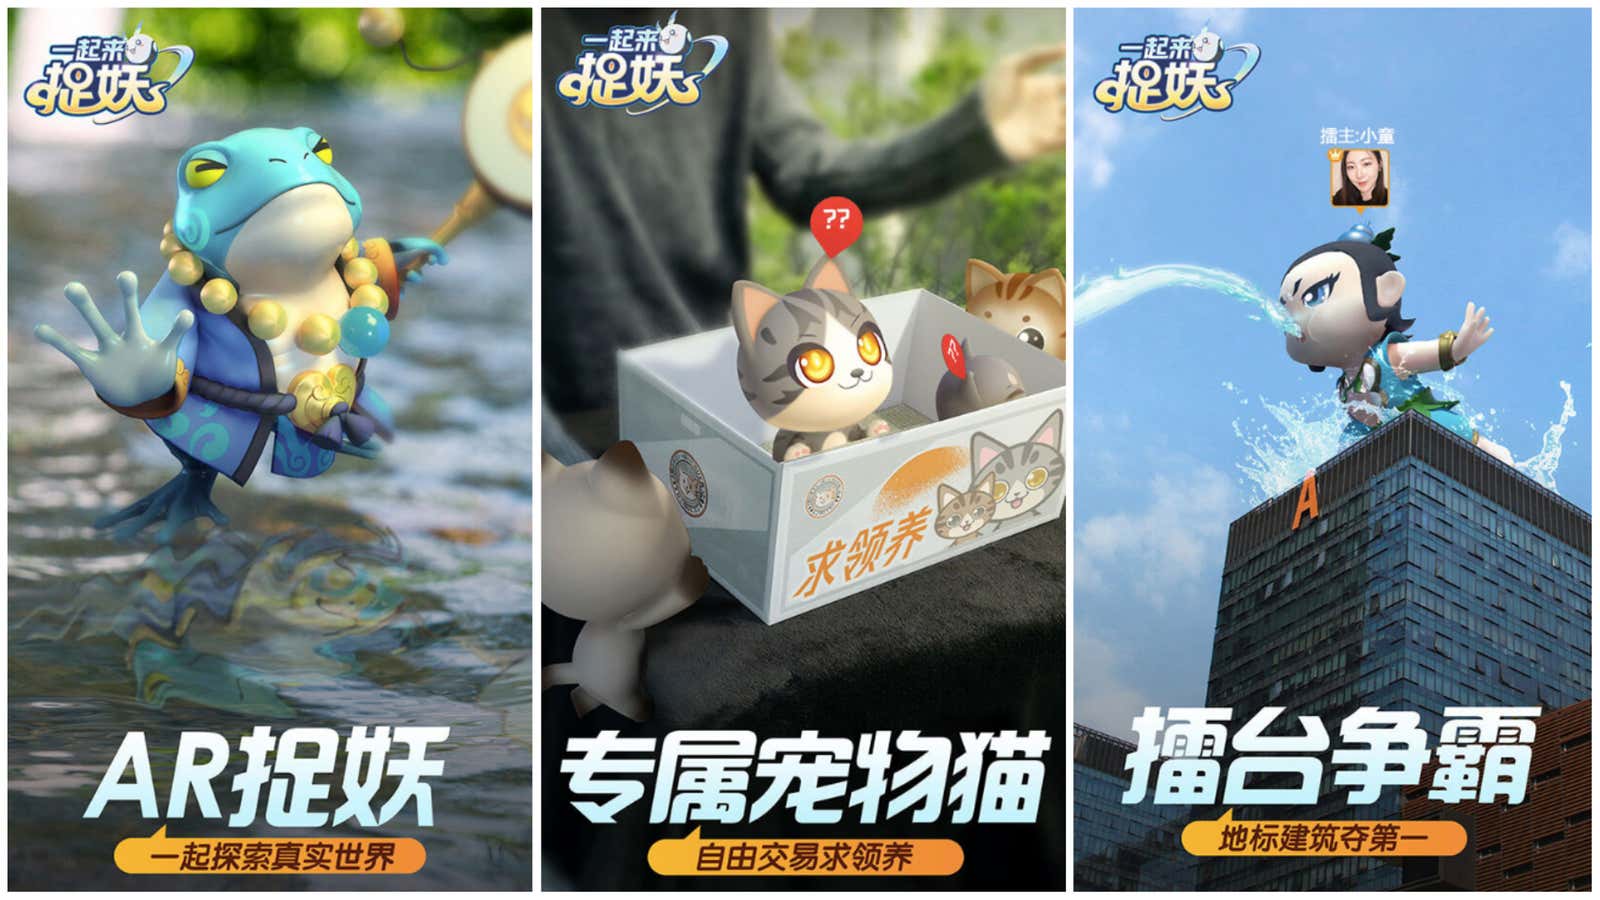 There's a new Pokémon game being made by China's Tencent